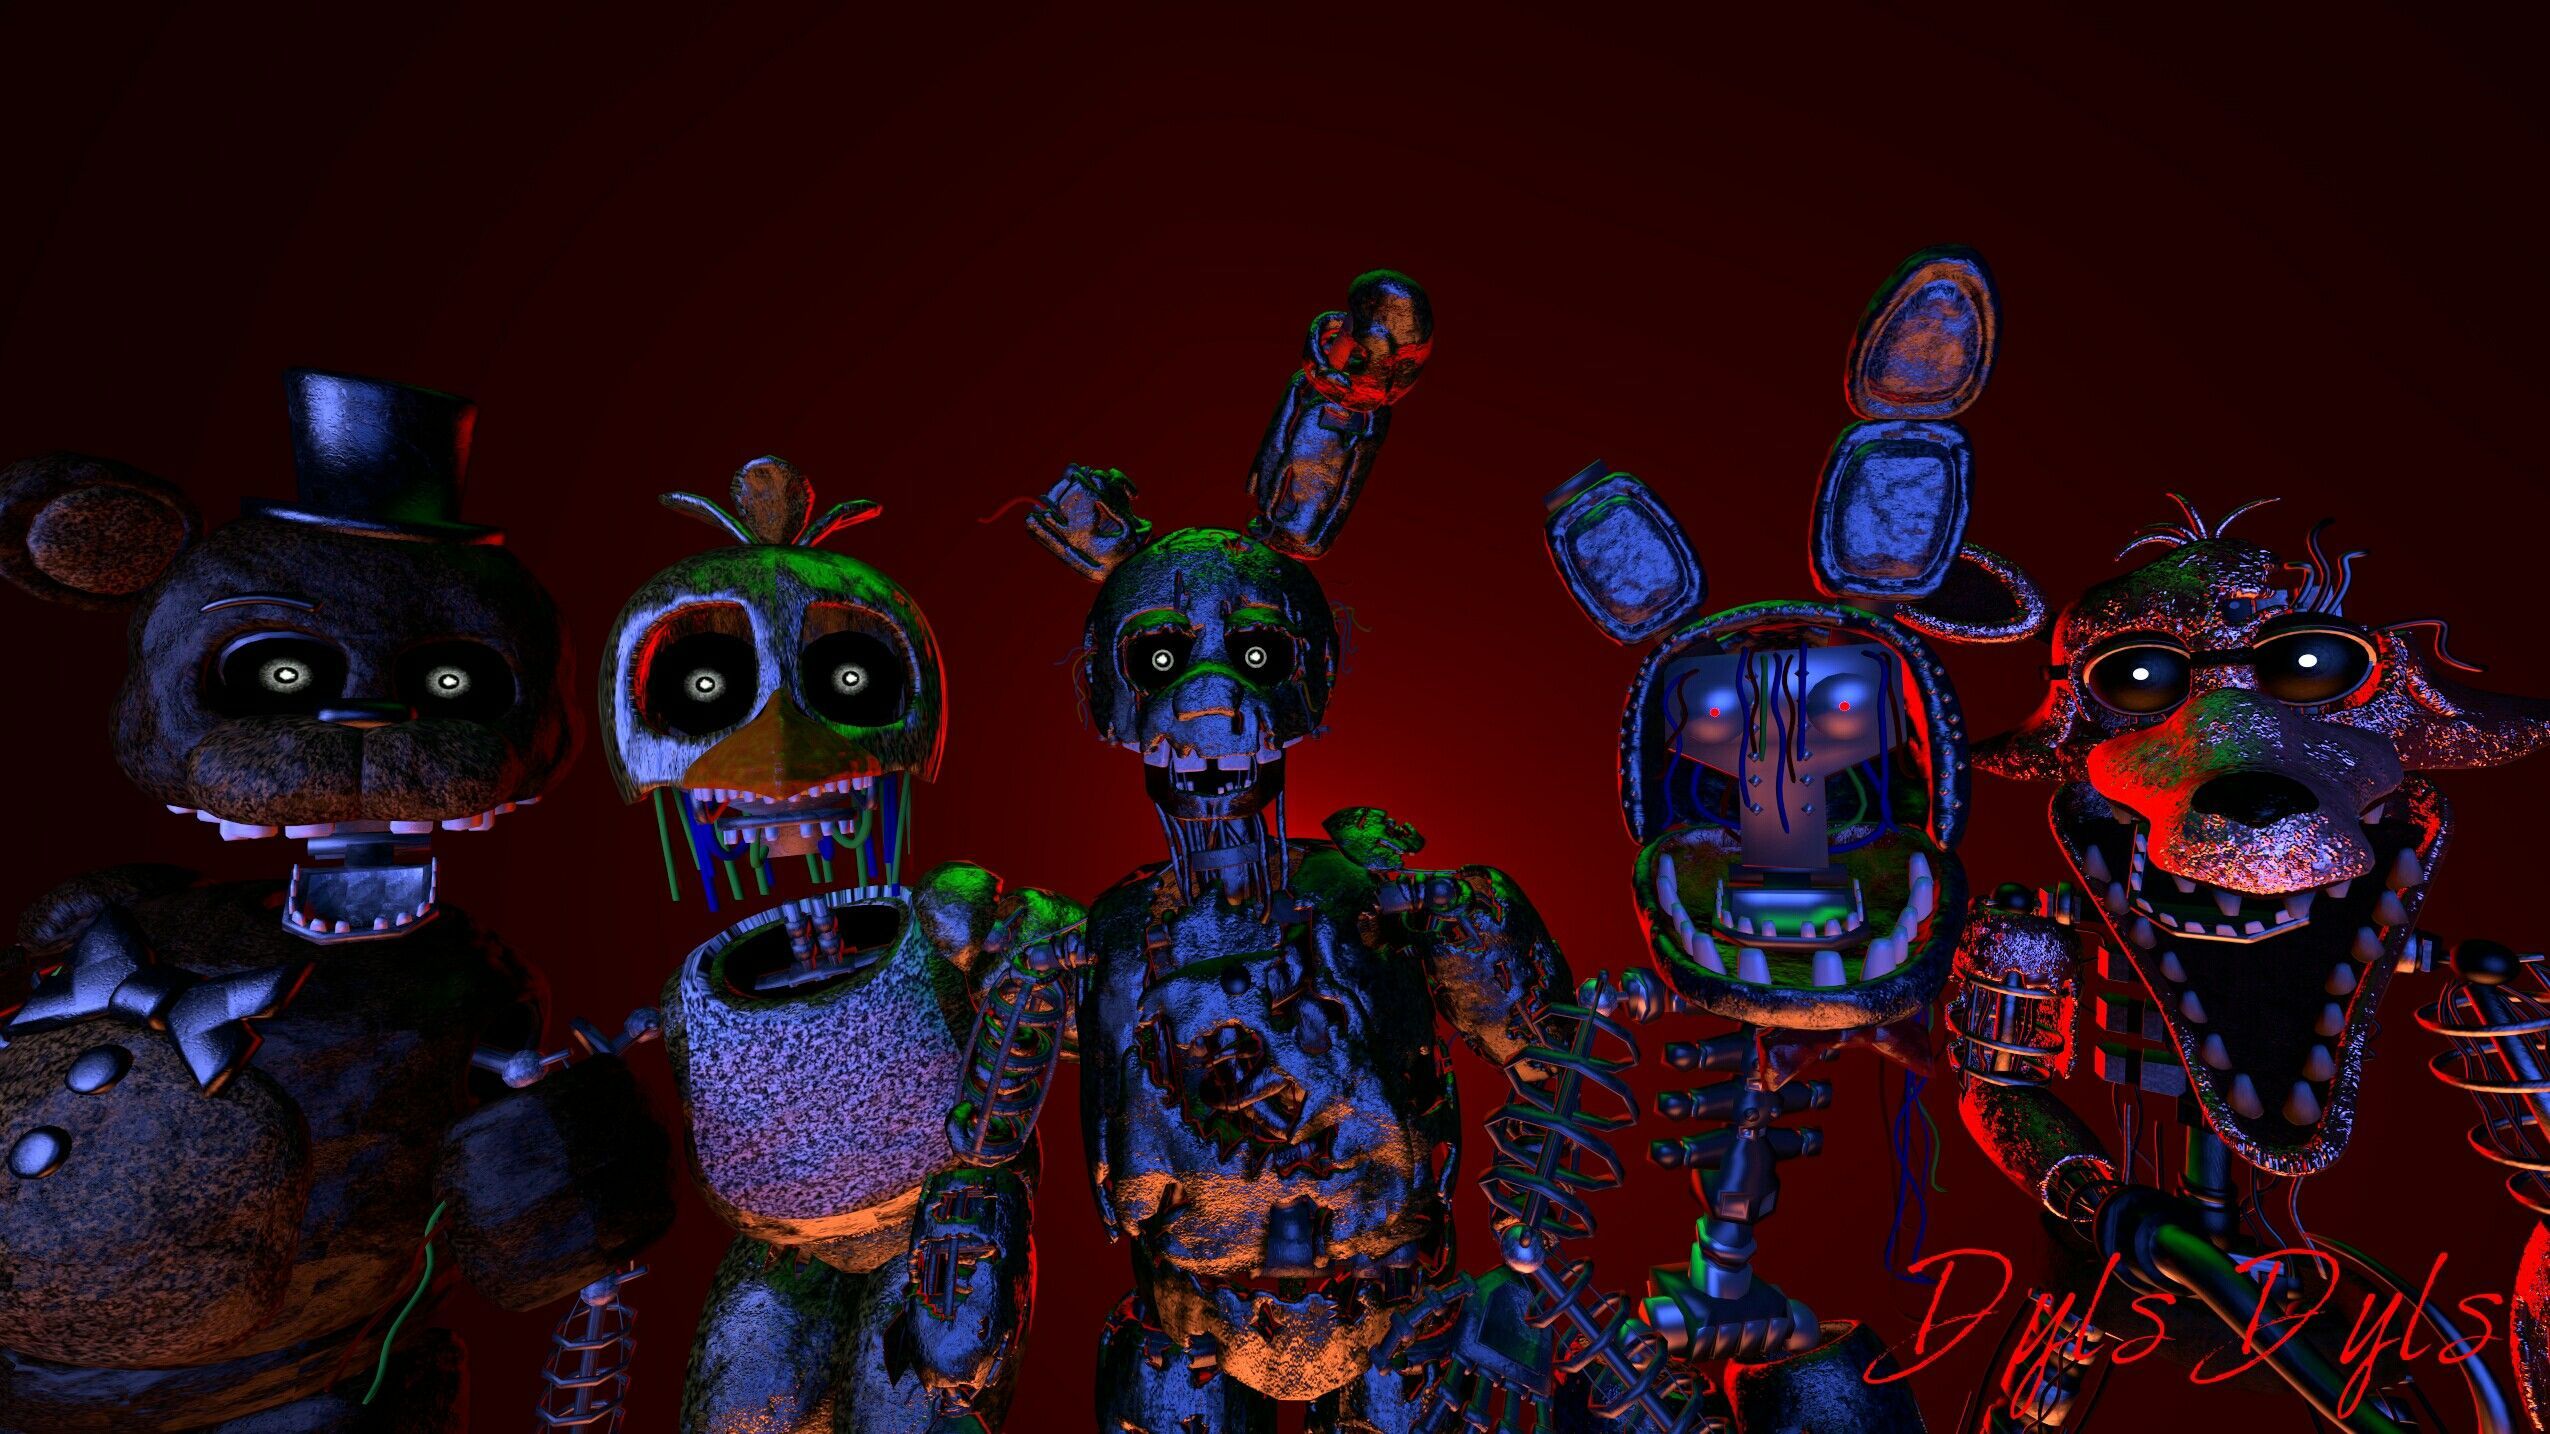 TJOC:R - Ignited Bonnie by TF541Productions  Fnaf jumpscares, Fnaf  wallpapers, Five nights at freddy's